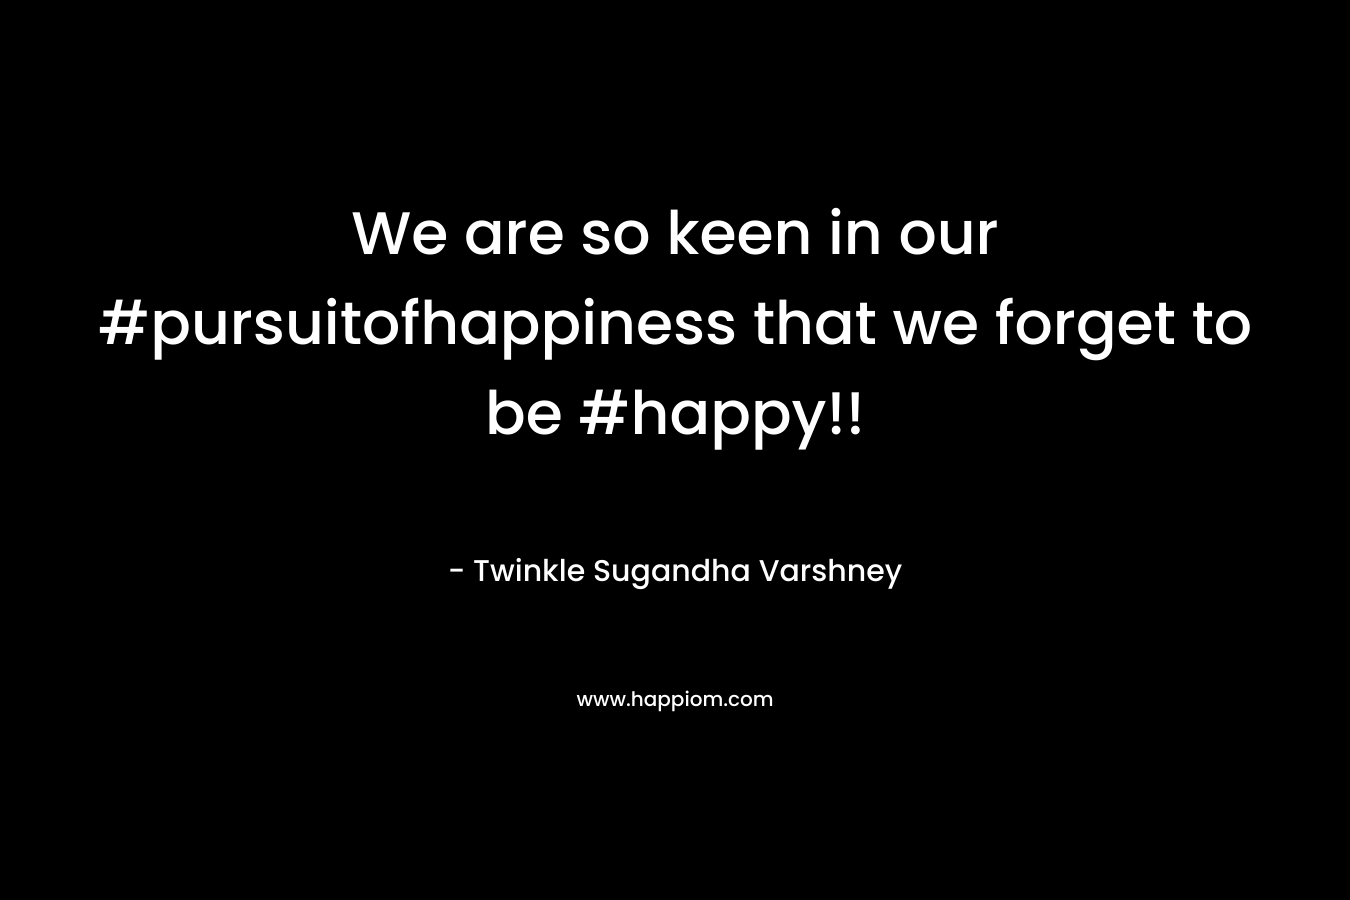 We are so keen in our #pursuitofhappiness that we forget to be #happy!!